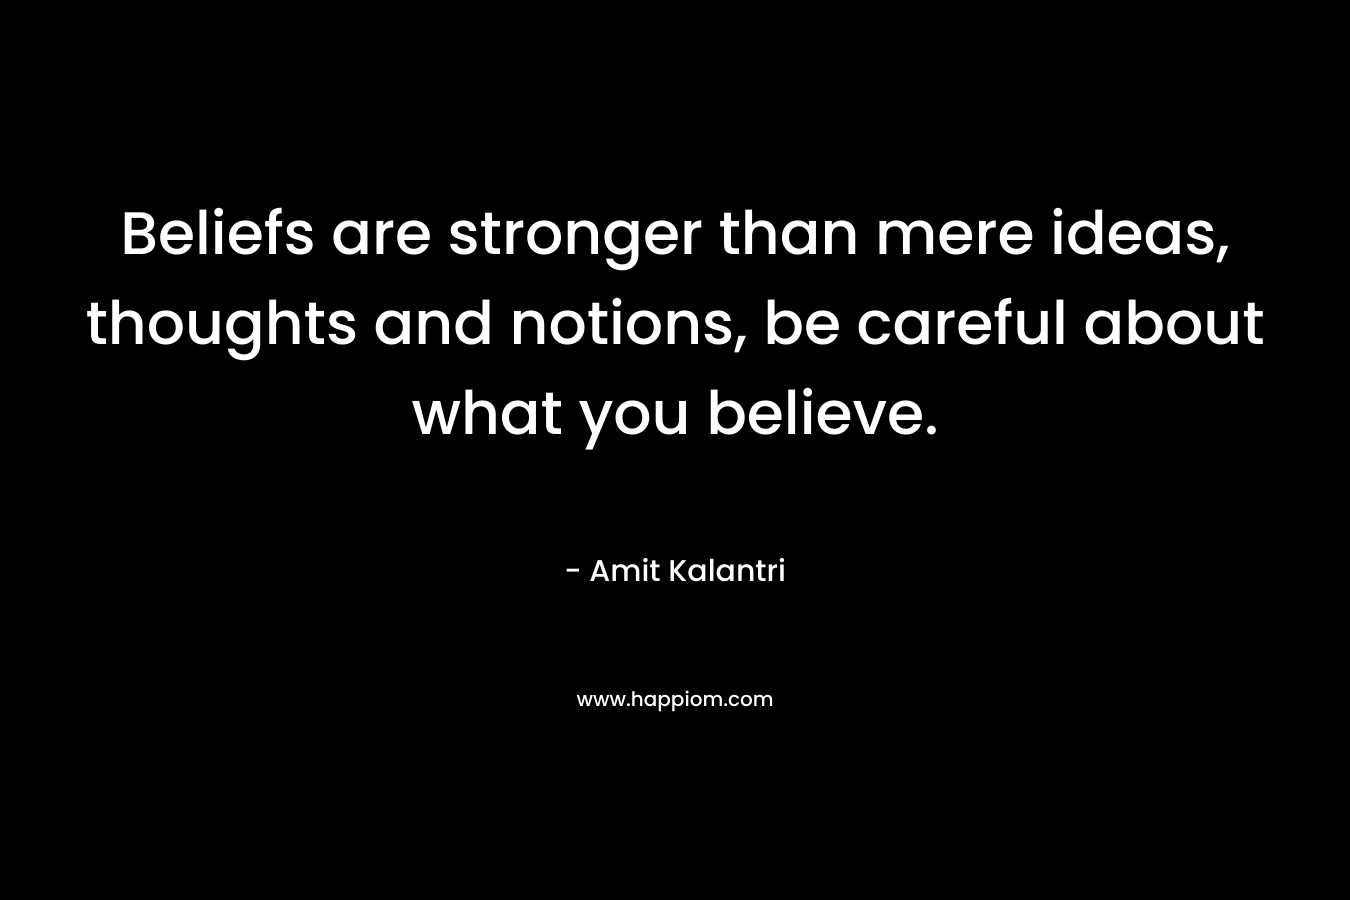 Beliefs are stronger than mere ideas, thoughts and notions, be careful about what you believe.